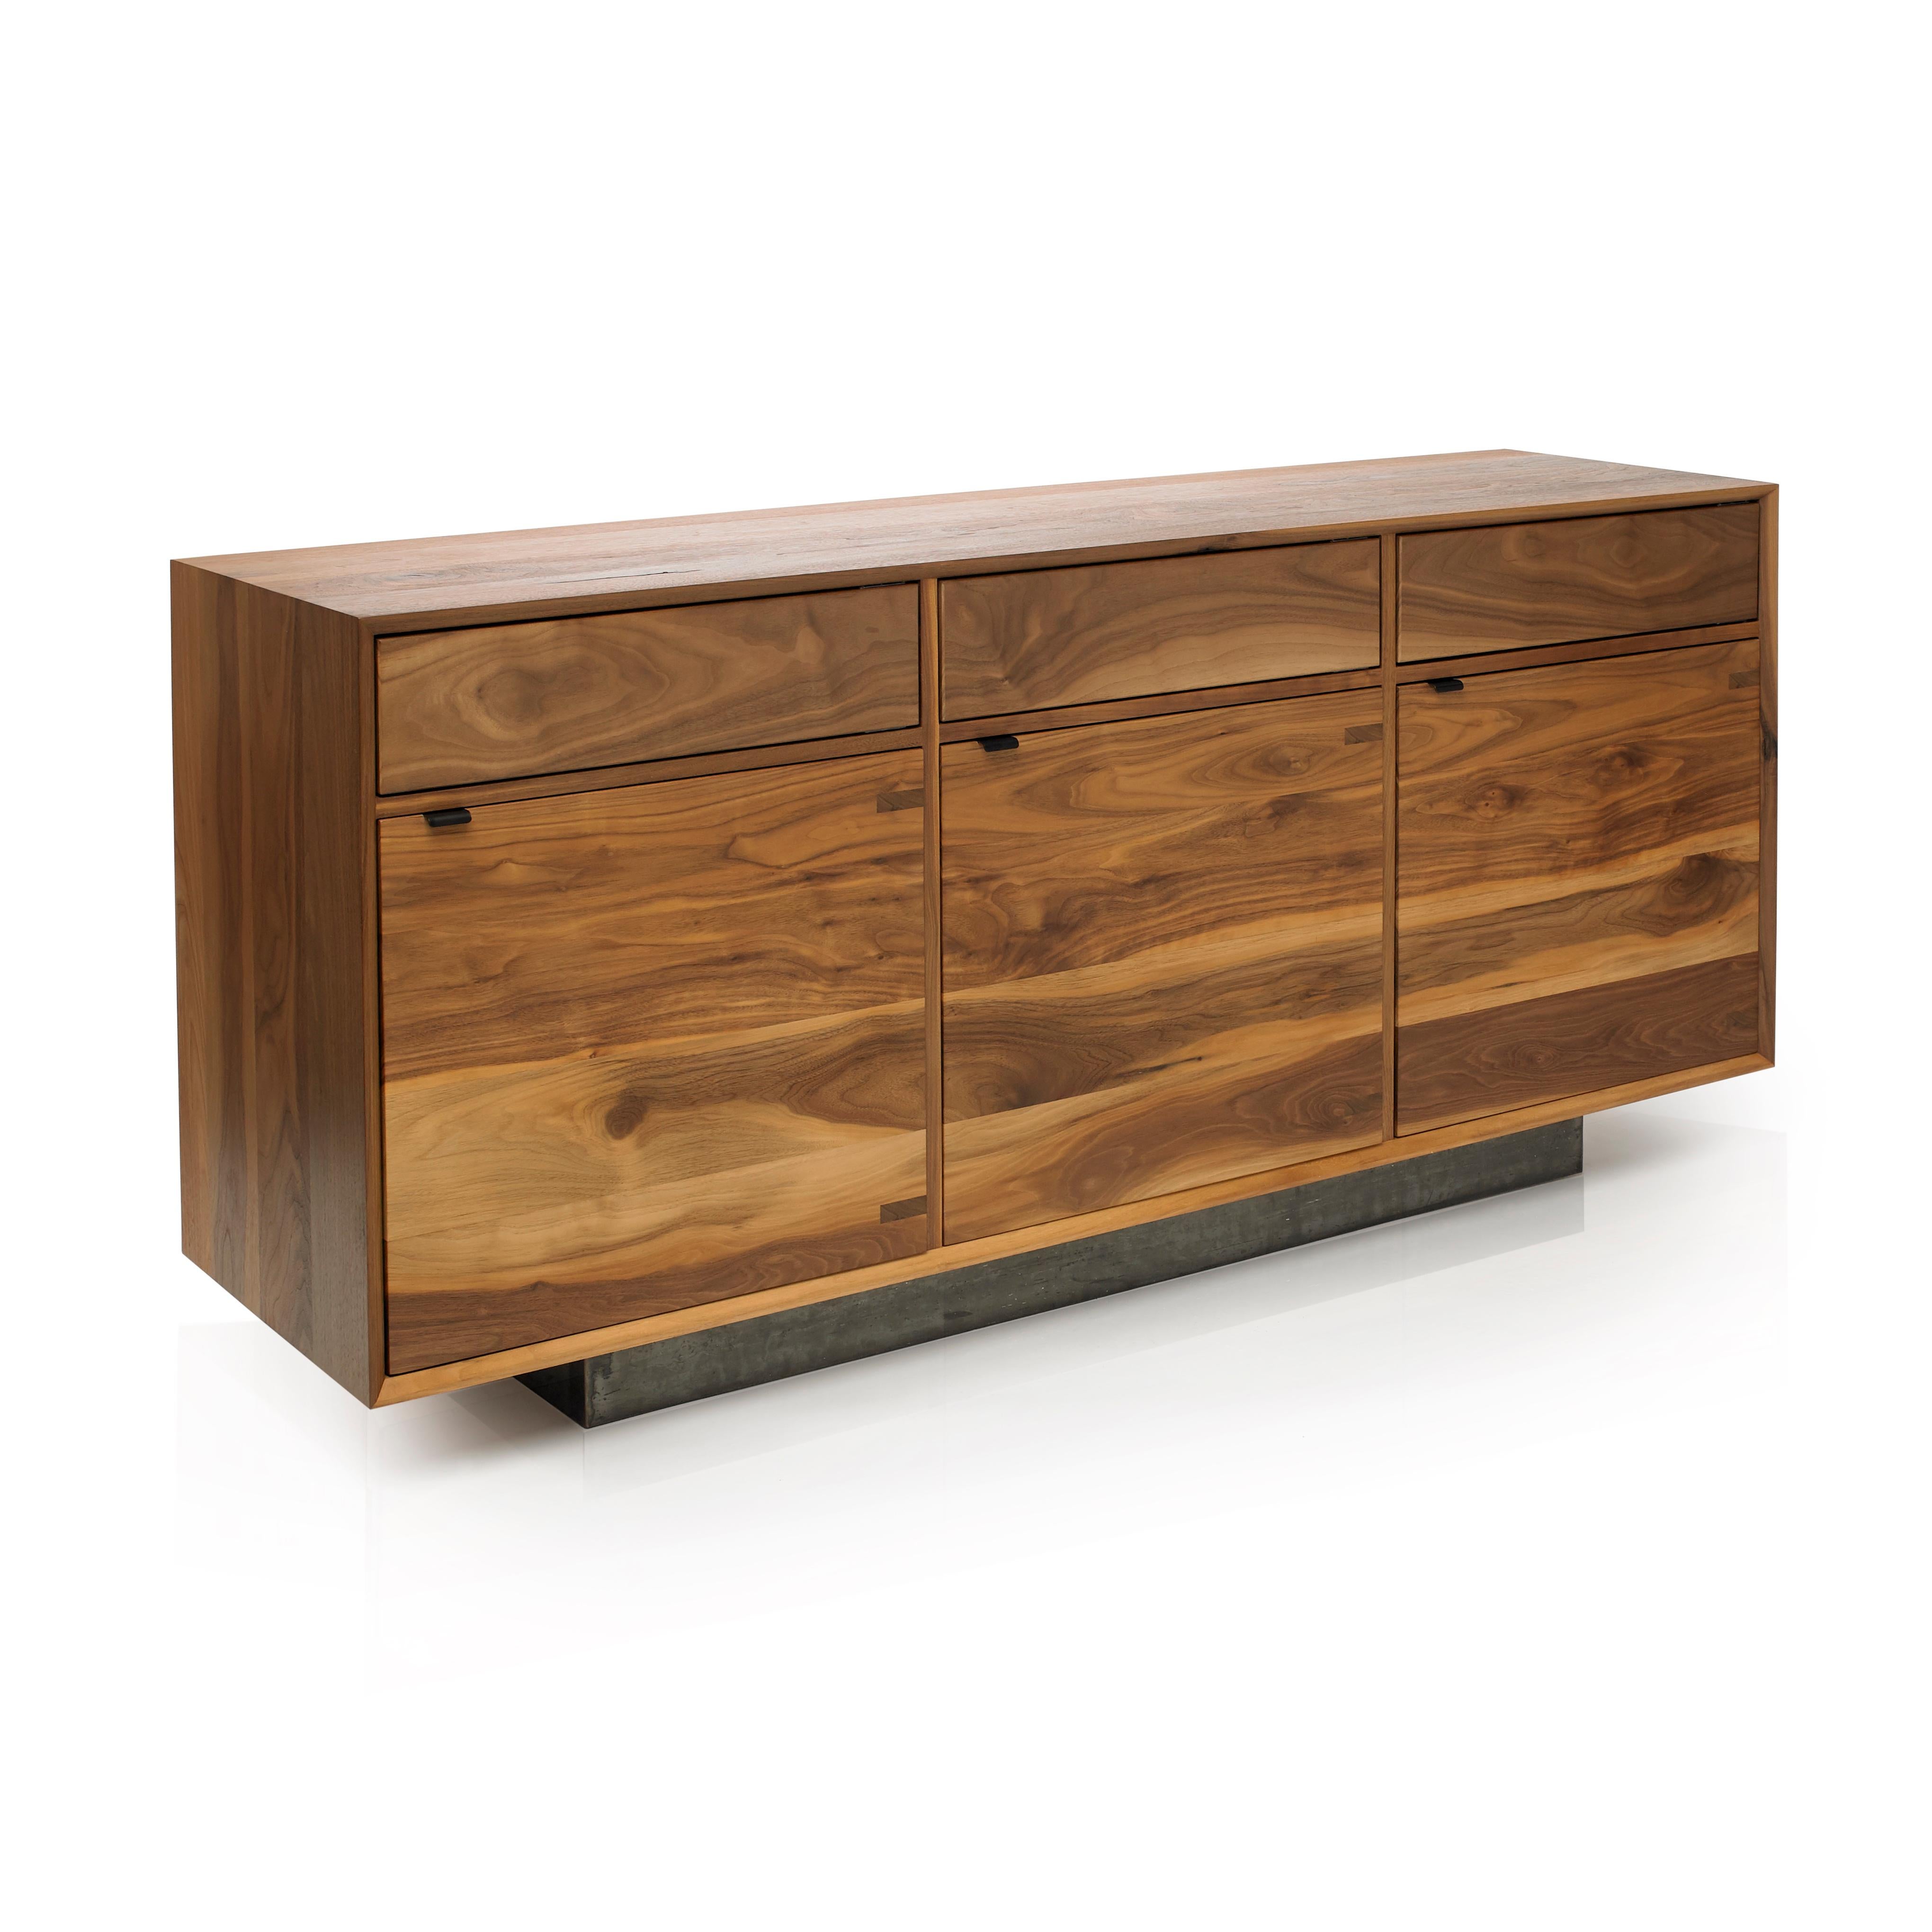 Solid black walnut credenza constructed with uncommonly practiced solid wood carcass, cabinet doors, and interior shelves. The handcrafted credenza uses push front hinged top doors for concealed storage. Black steel door pulls, soft close hinges set